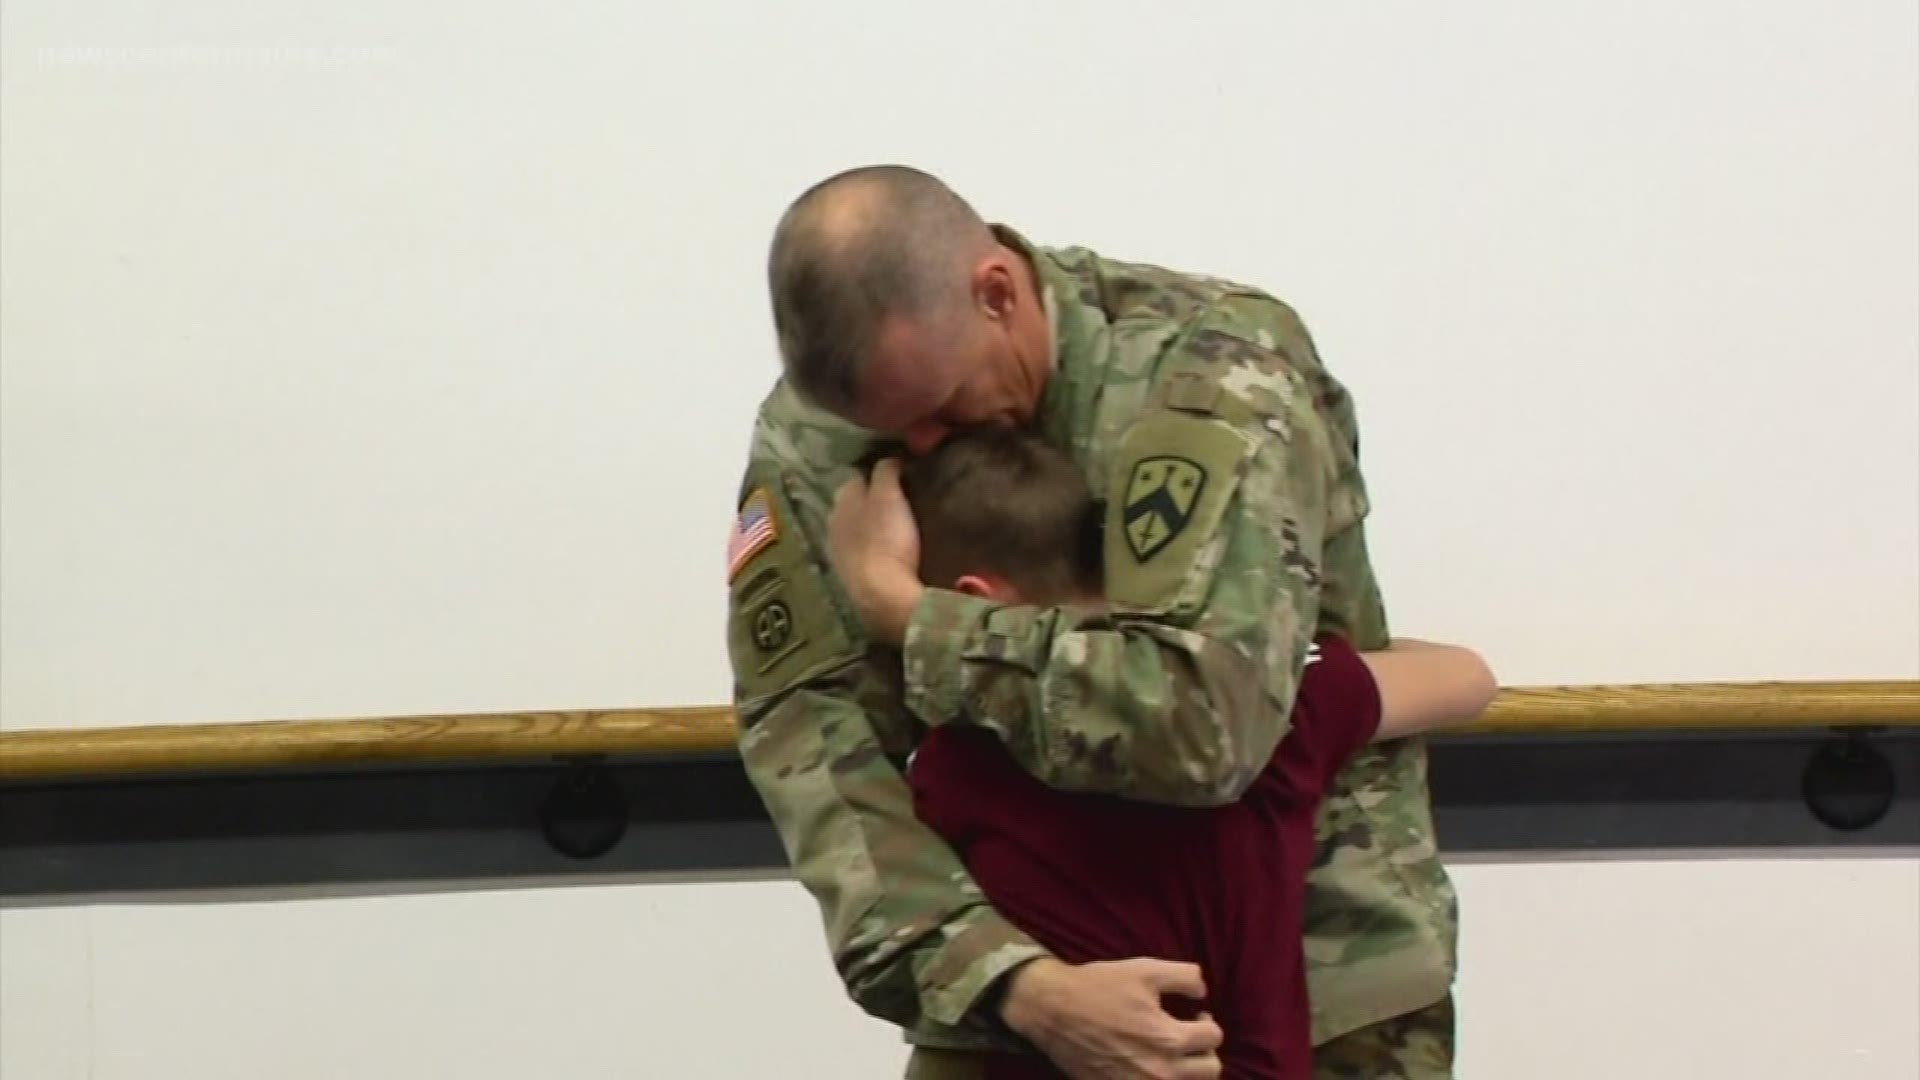 Tennessee soldier surprises son at taekwondo class